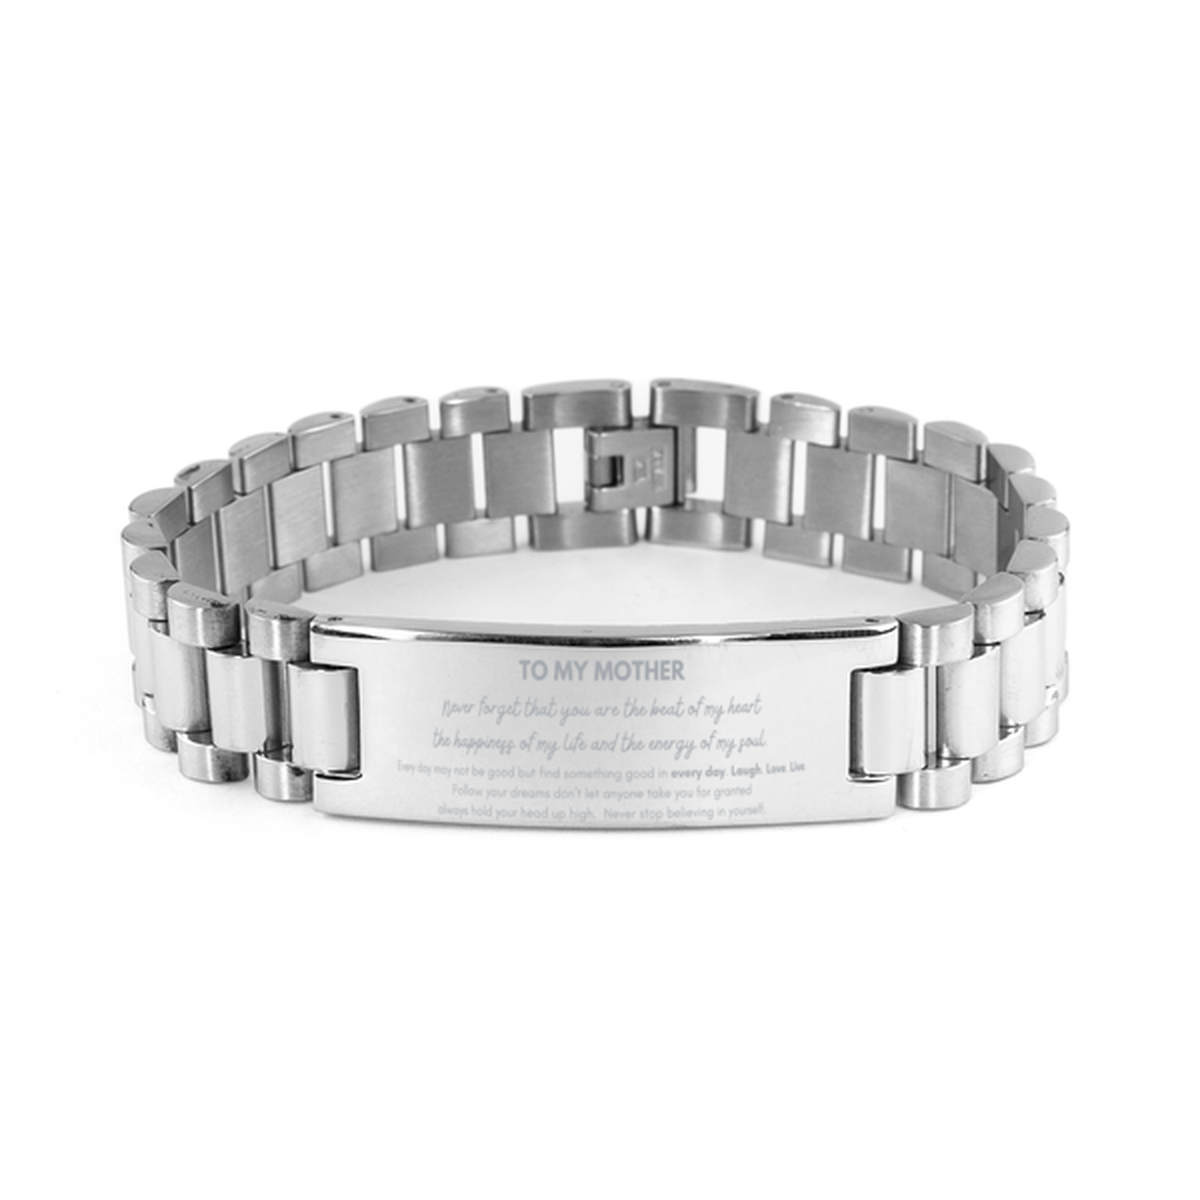 To My Mother Bracelet Gifts, Christmas Mother Ladder Stainless Steel Bracelet Present, Birthday Unique Motivational For Mother, To My Mother Never forget that you are the beat of my heart the happiness of my life and the energy of my soul